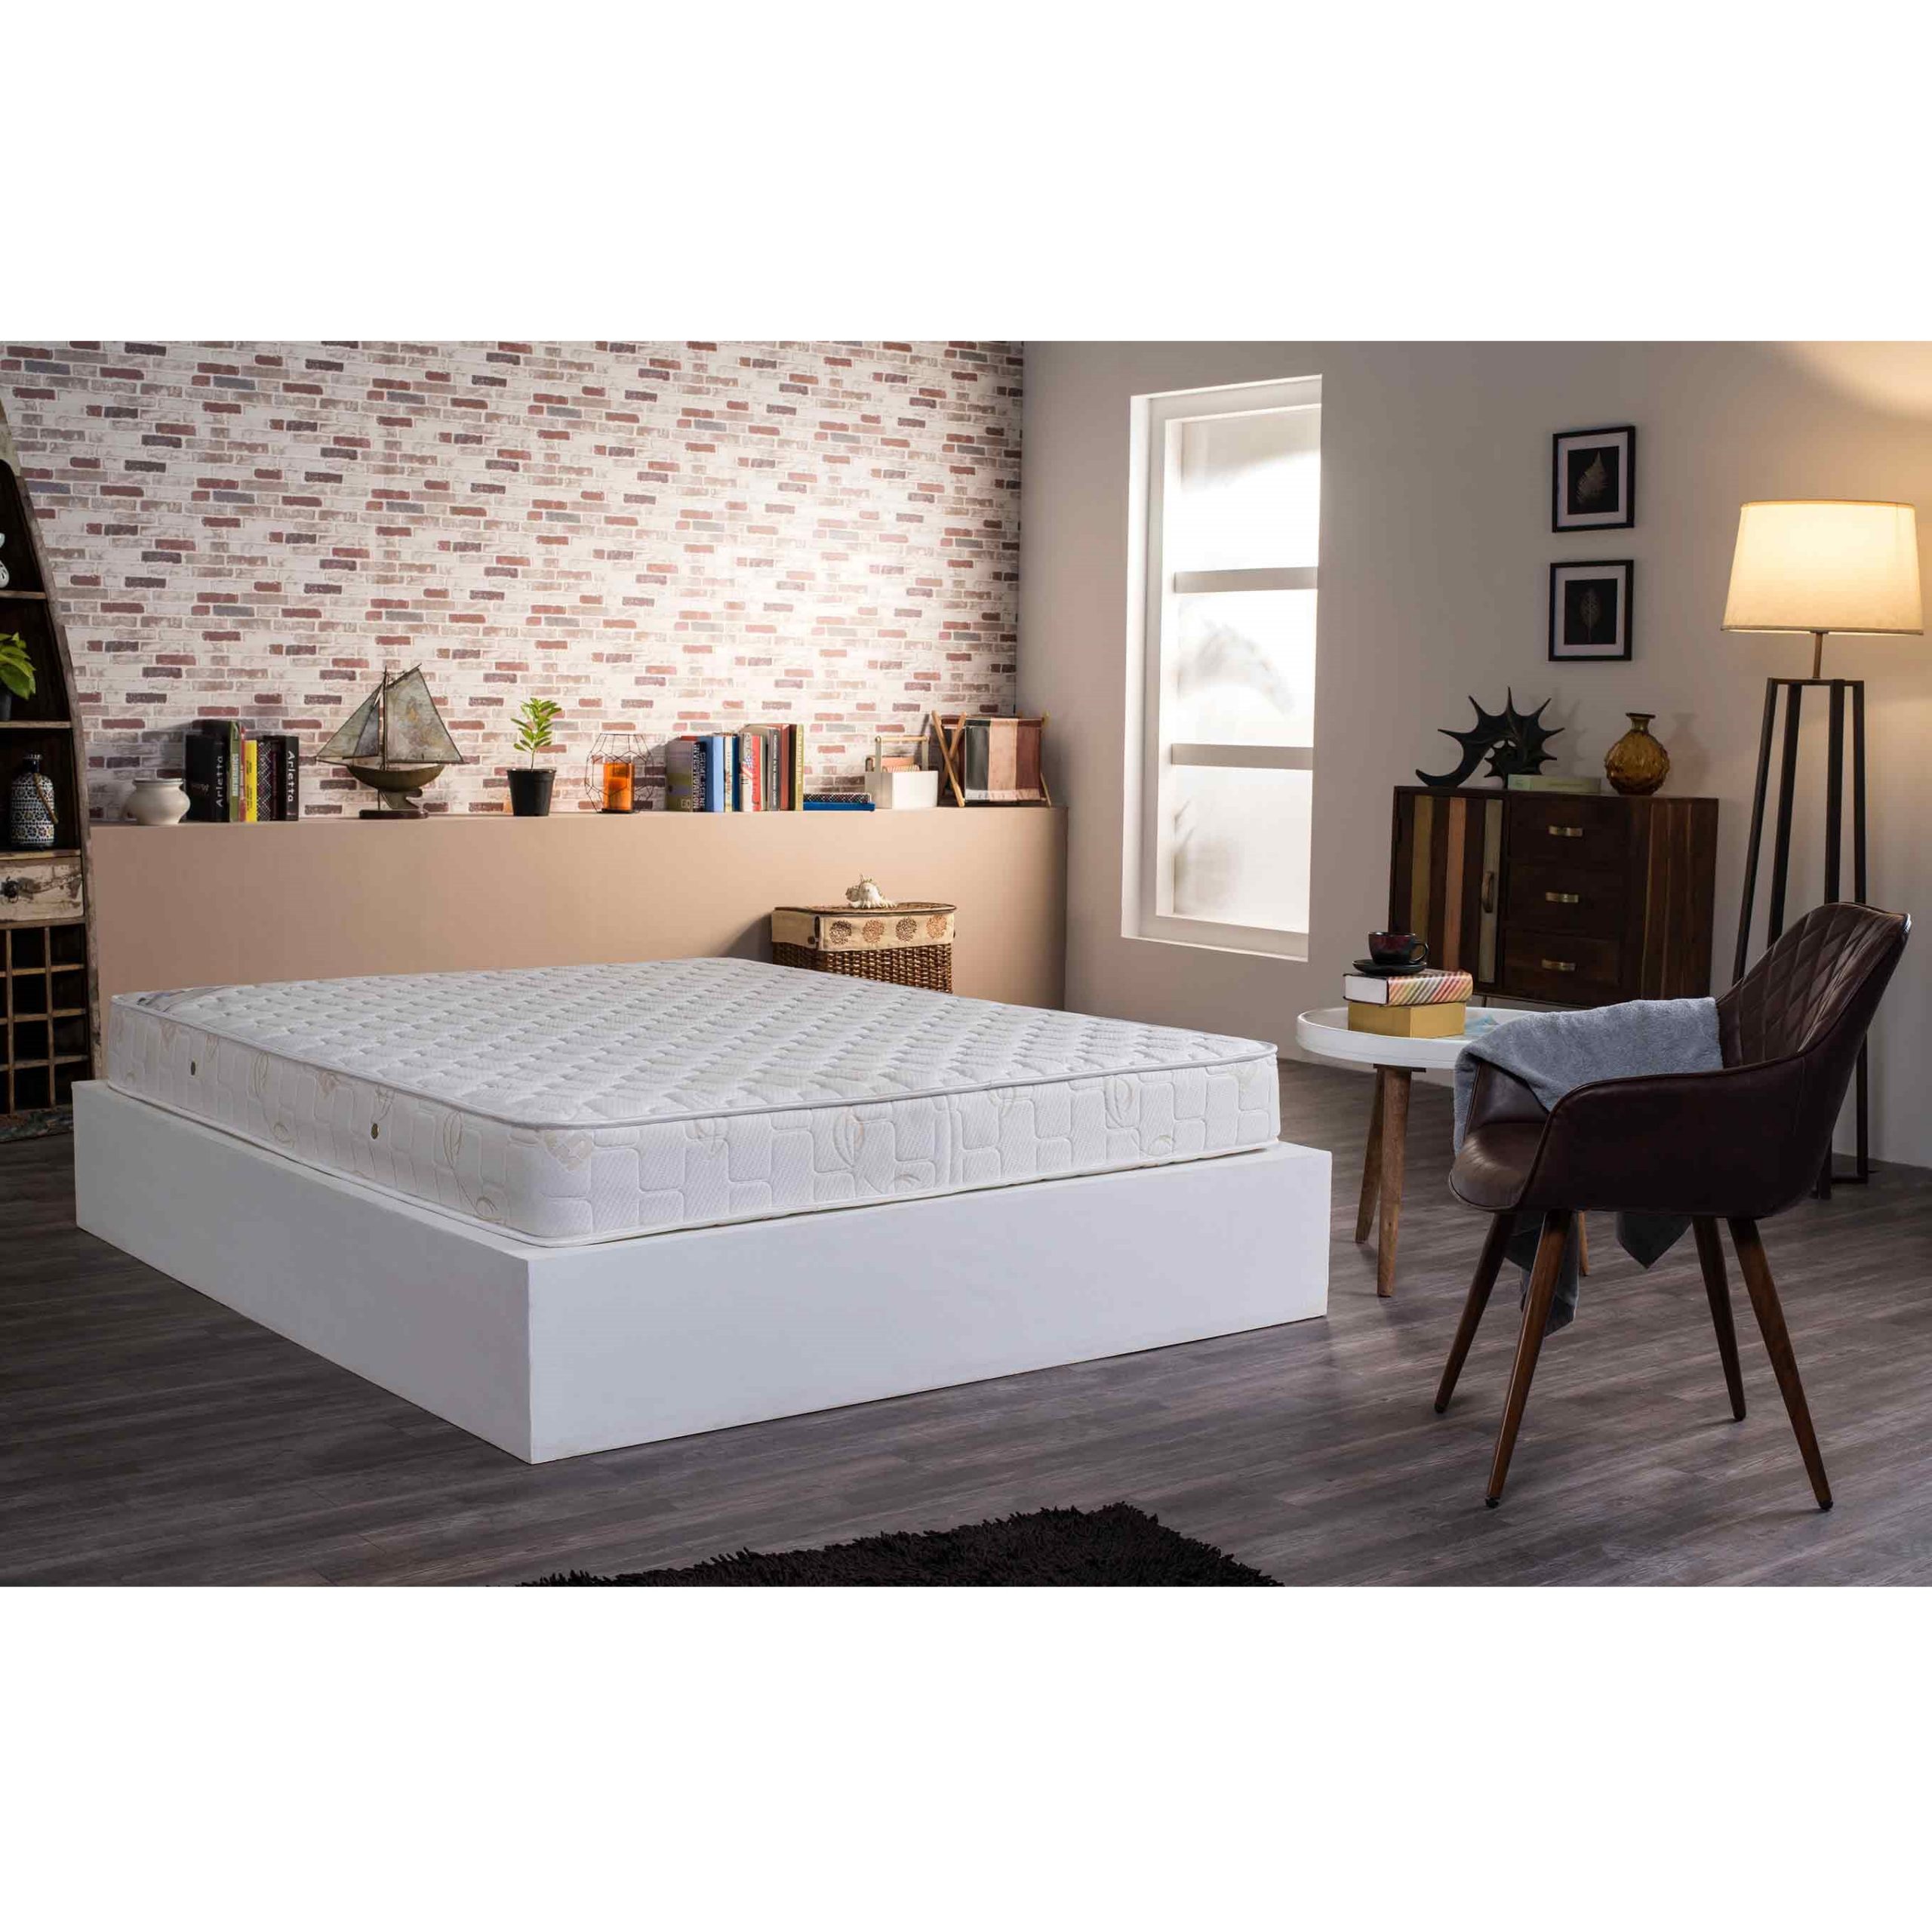 How to choose the best memory foam mattress with a sturdy 7-inch layer?